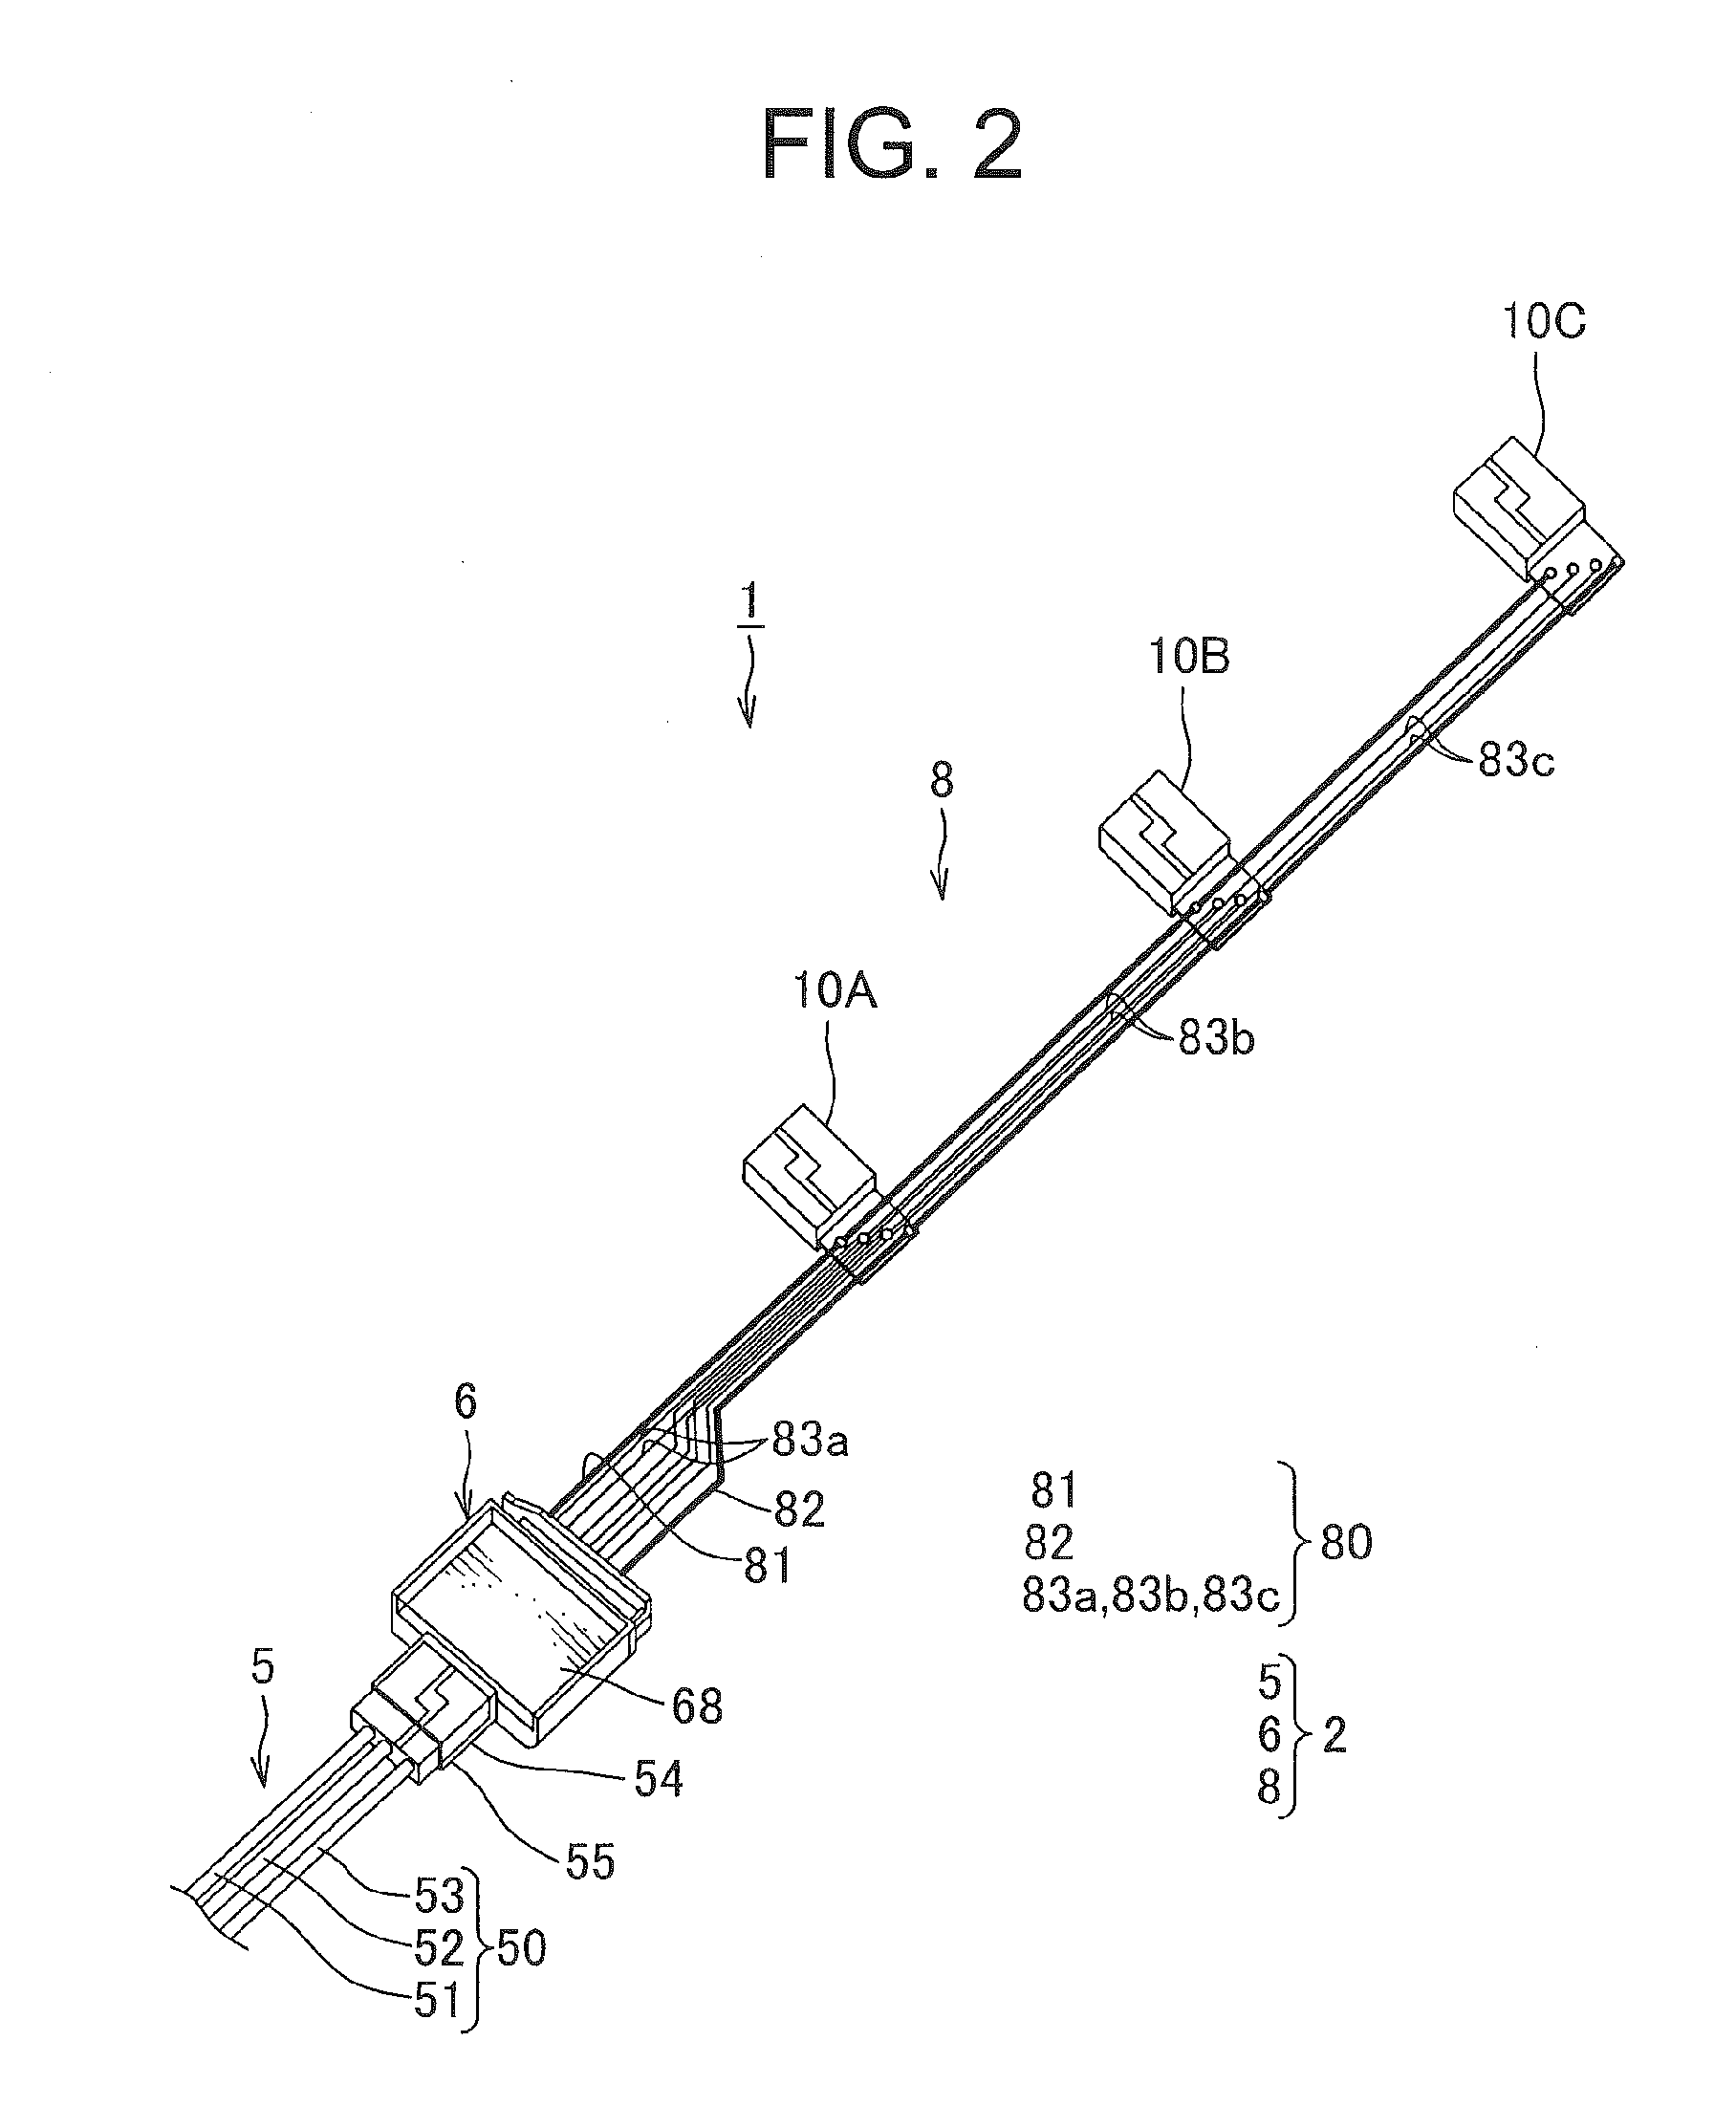 Wire harness structure and electronic device control system